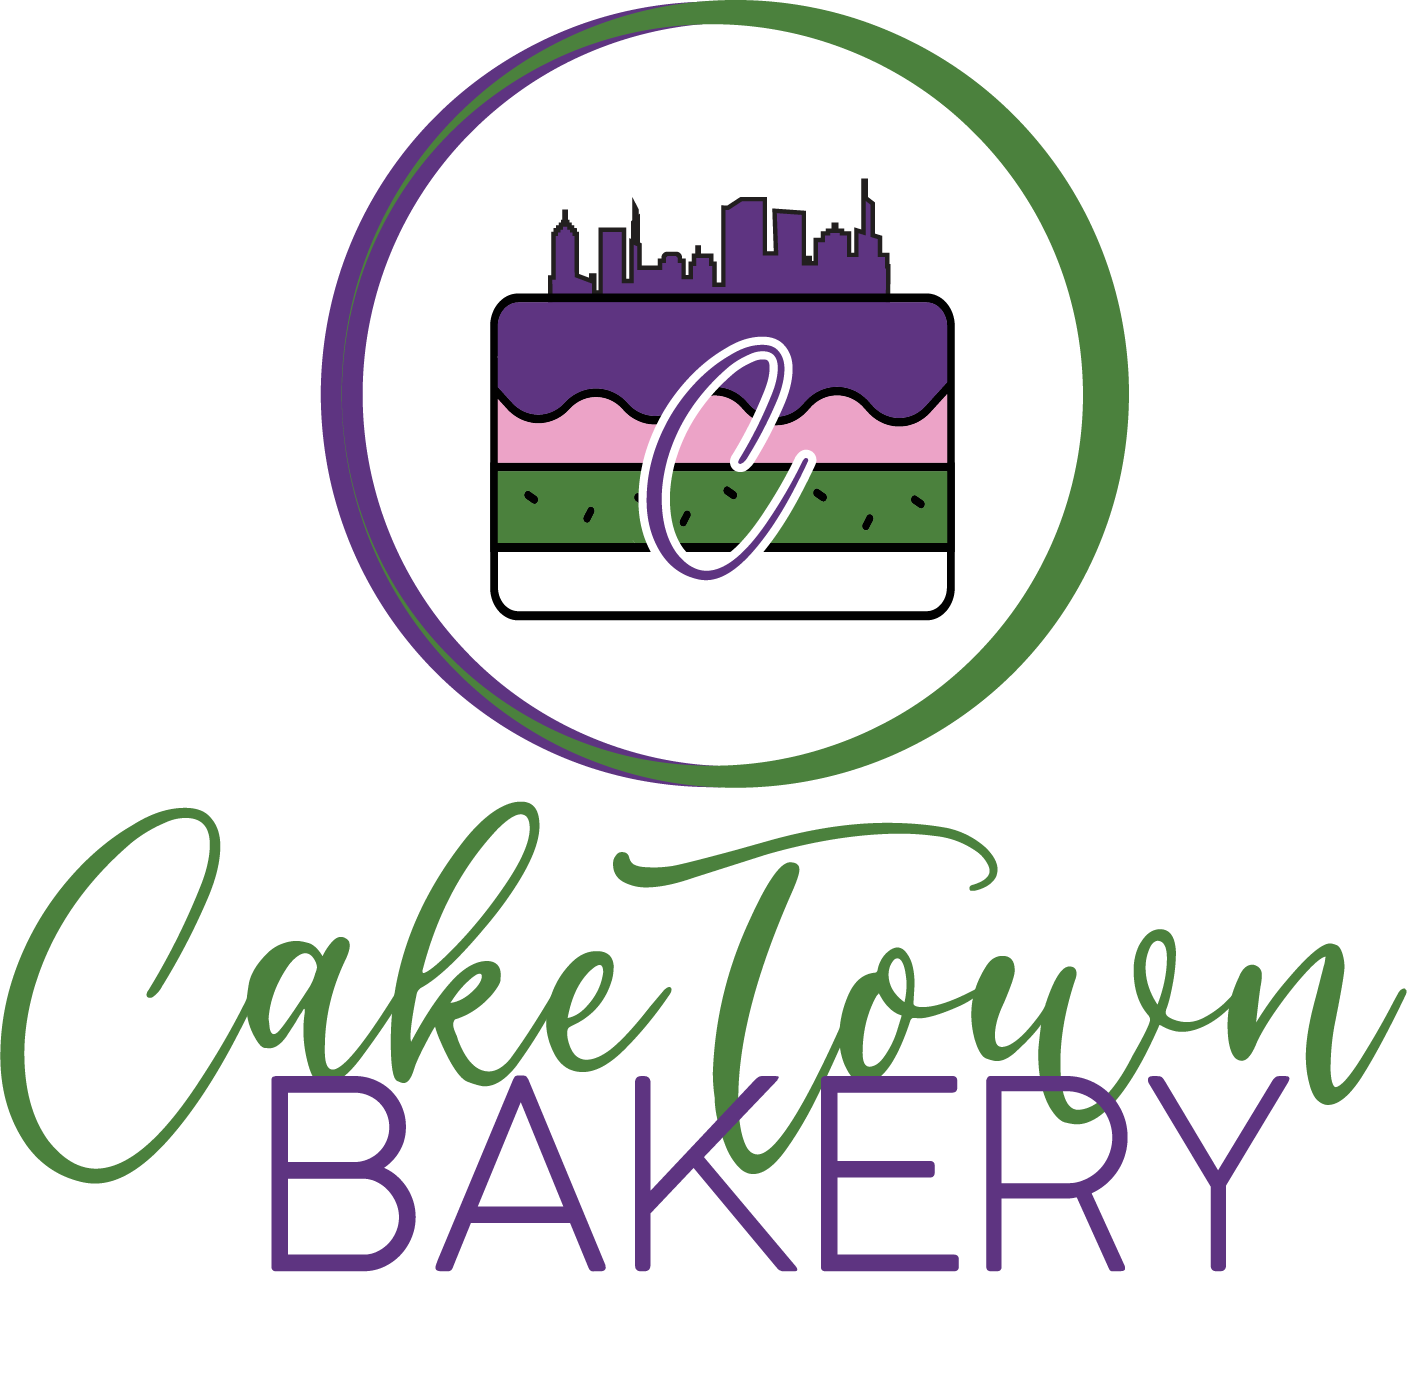 About | Cake Town Bakery NC